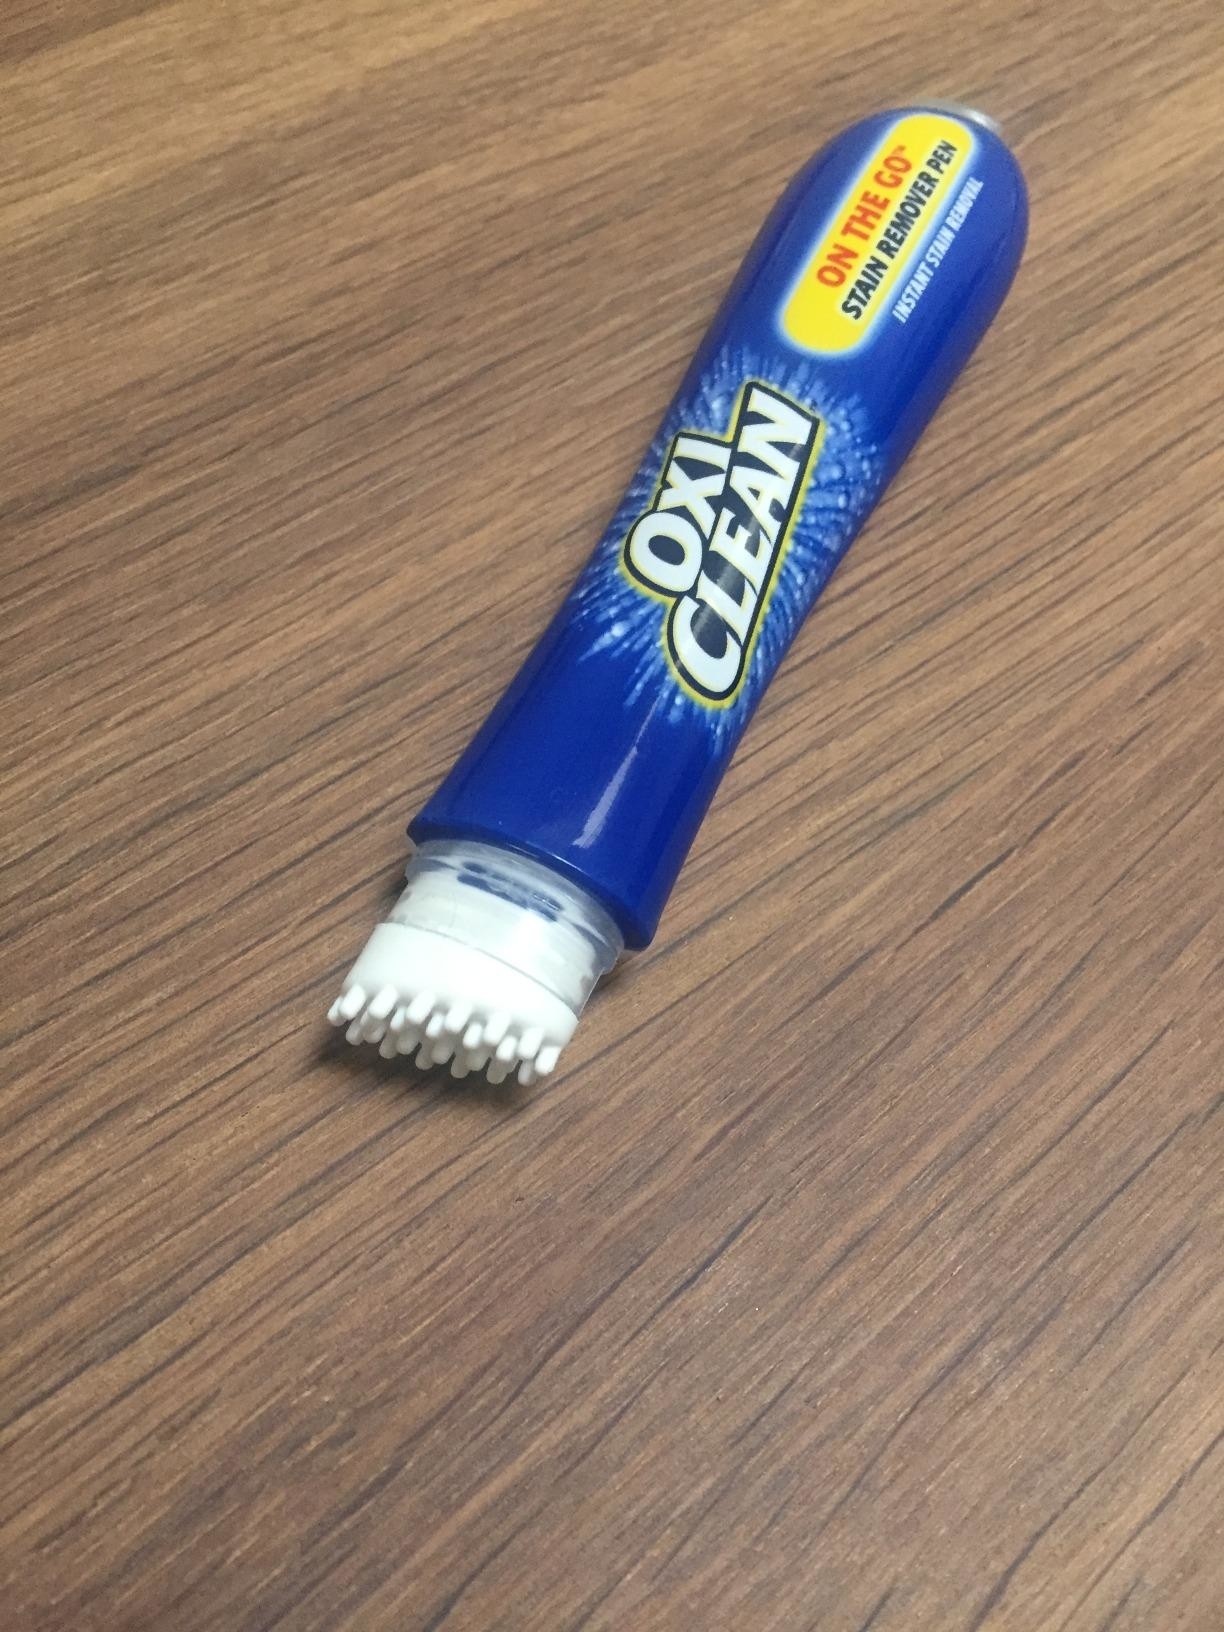 Reviewer&#x27;s photo of the OxiClean pen with the cap off to show its scrubbing tip